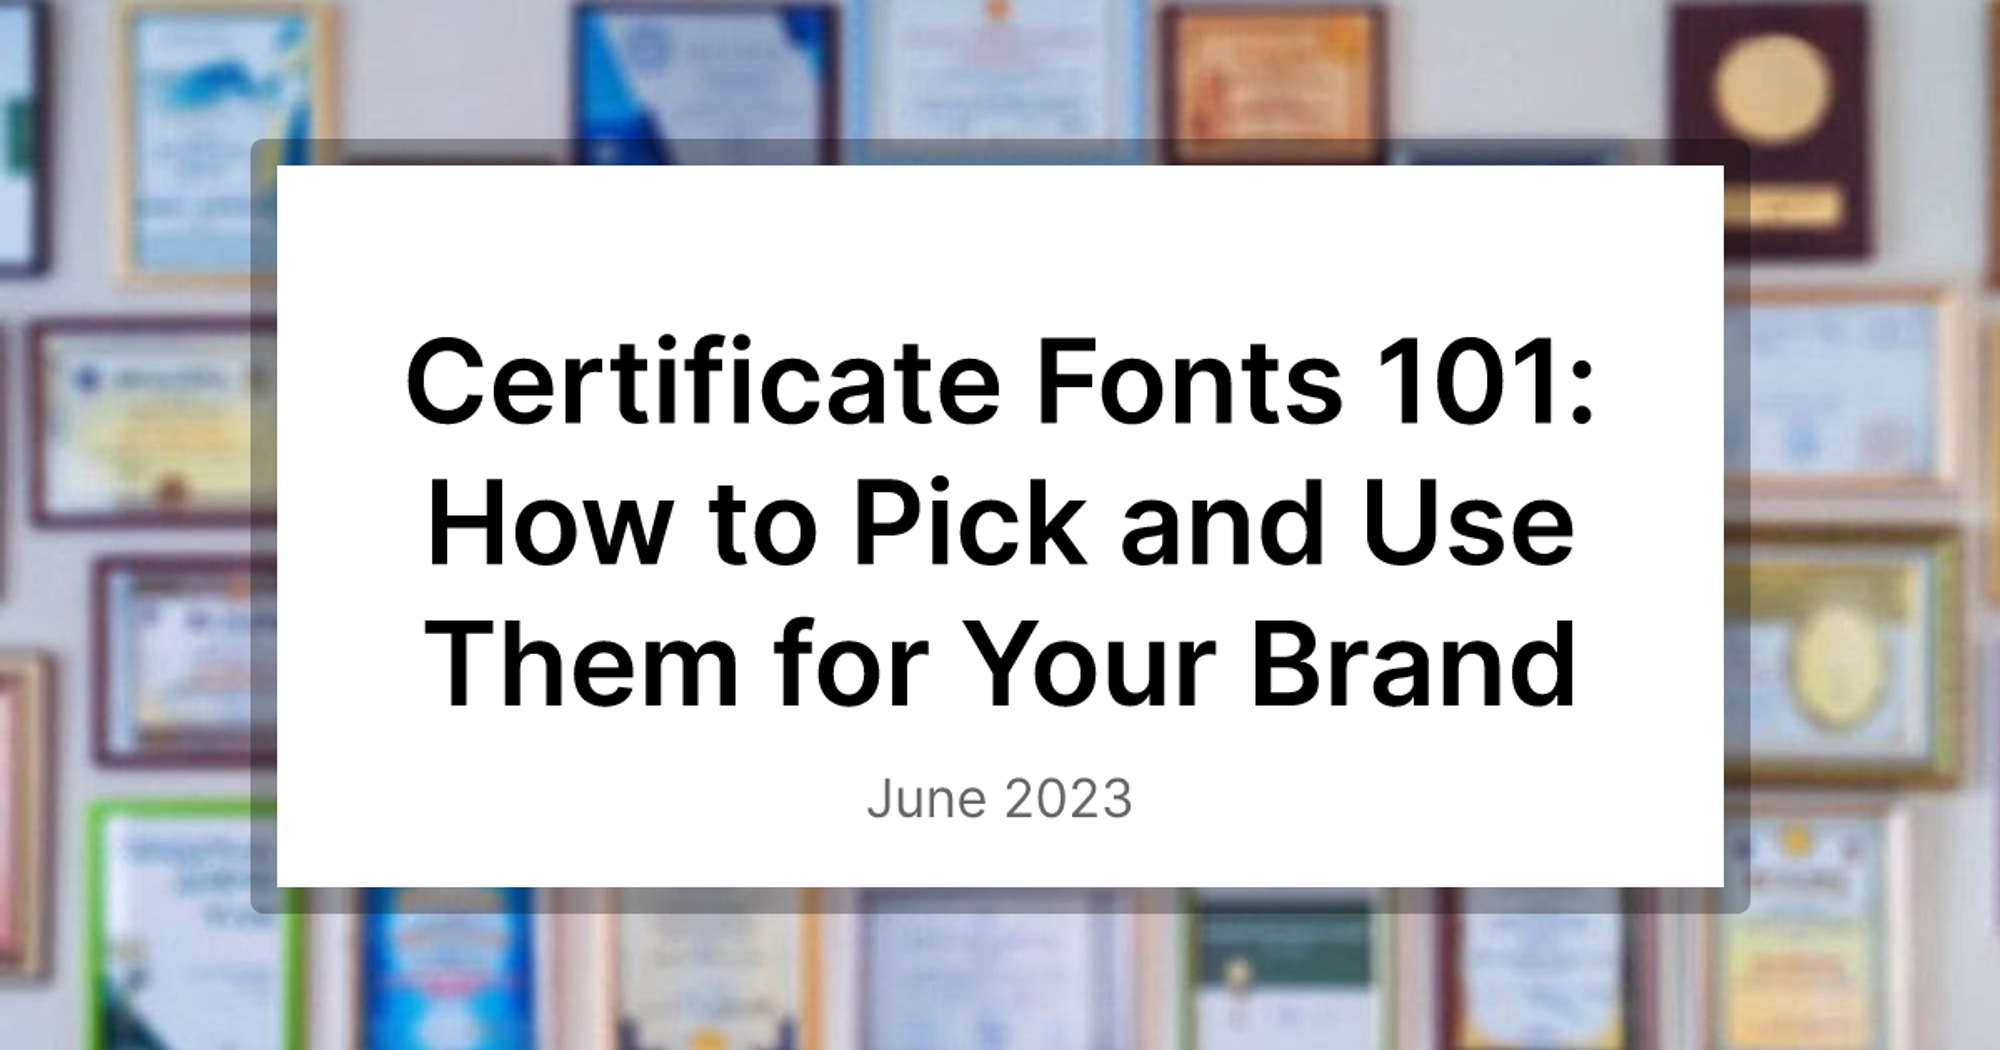 Certificate Fonts 101: How to Pick and Use Them for Your Brand